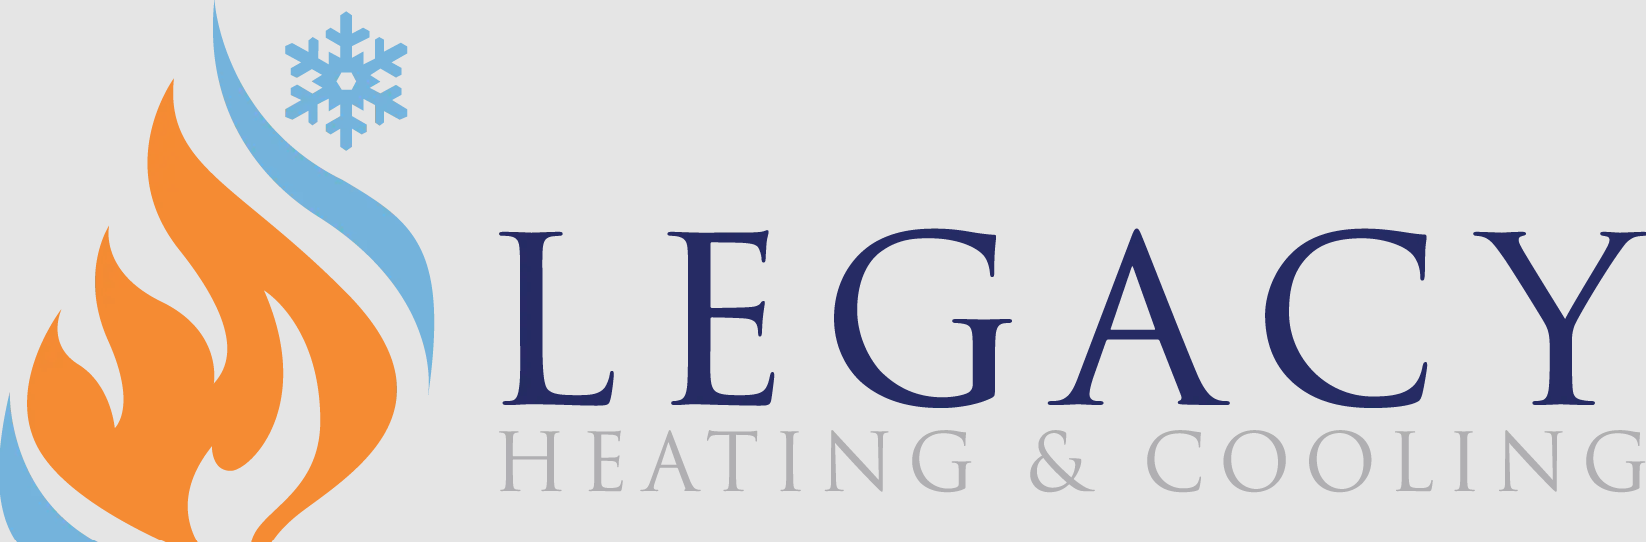 Thank You to Legacy Heating & Cooling